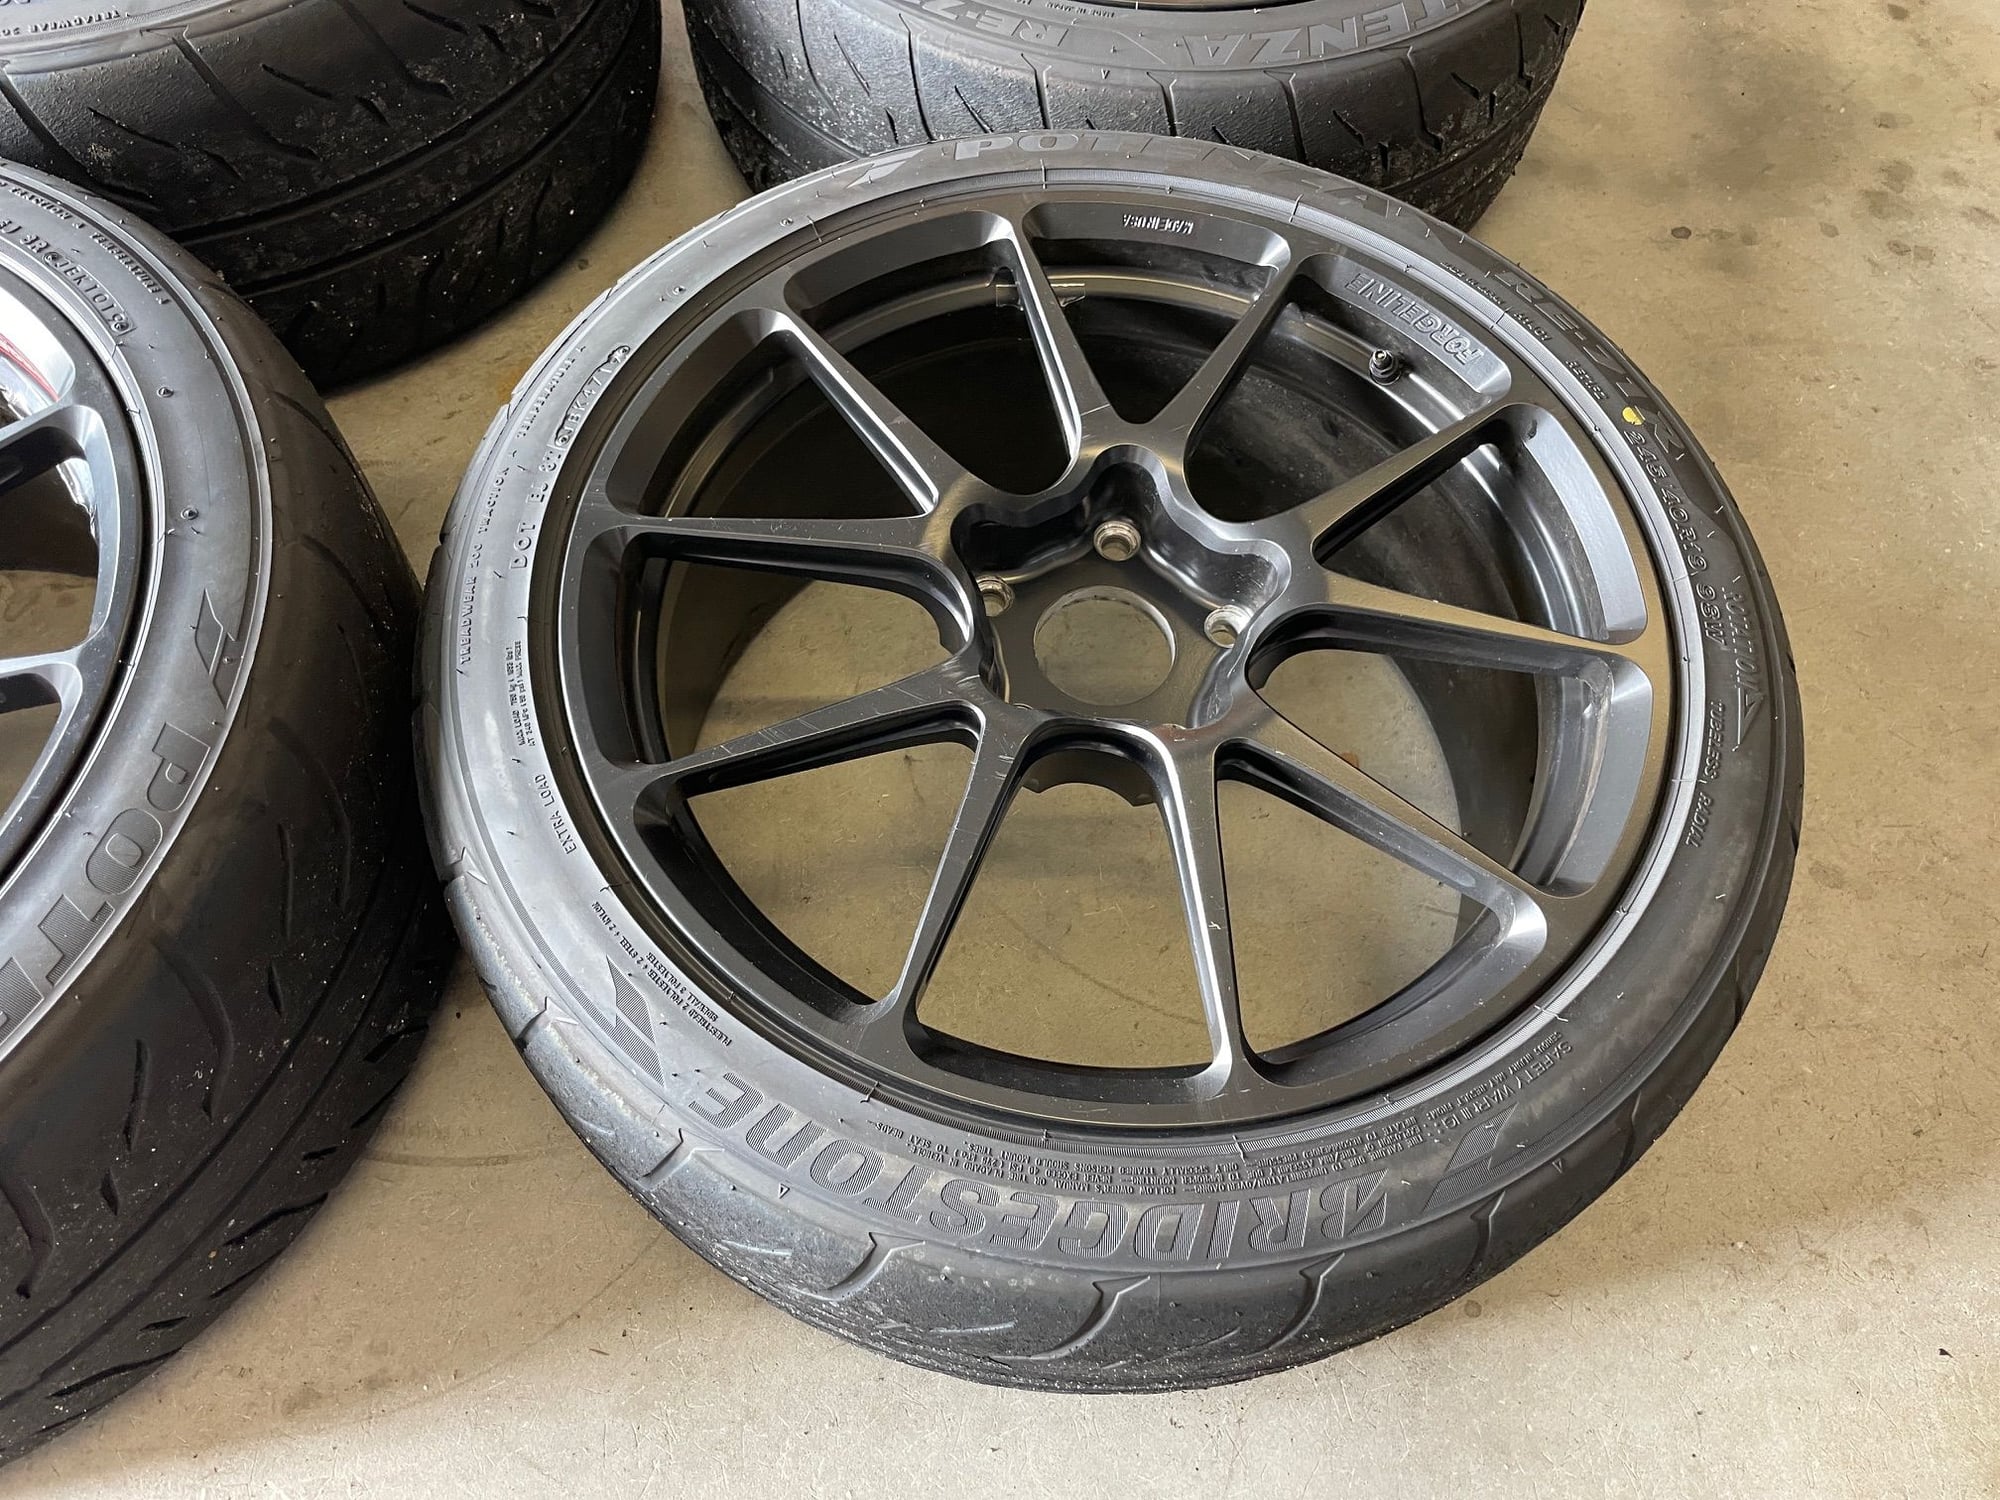 Wheels and Tires/Axles - FS: (7) 19" Black Forgeline GS1R Wheels with RE71r Tires for Cayman GT4 - Used - Lake Mary, FL 32746, United States